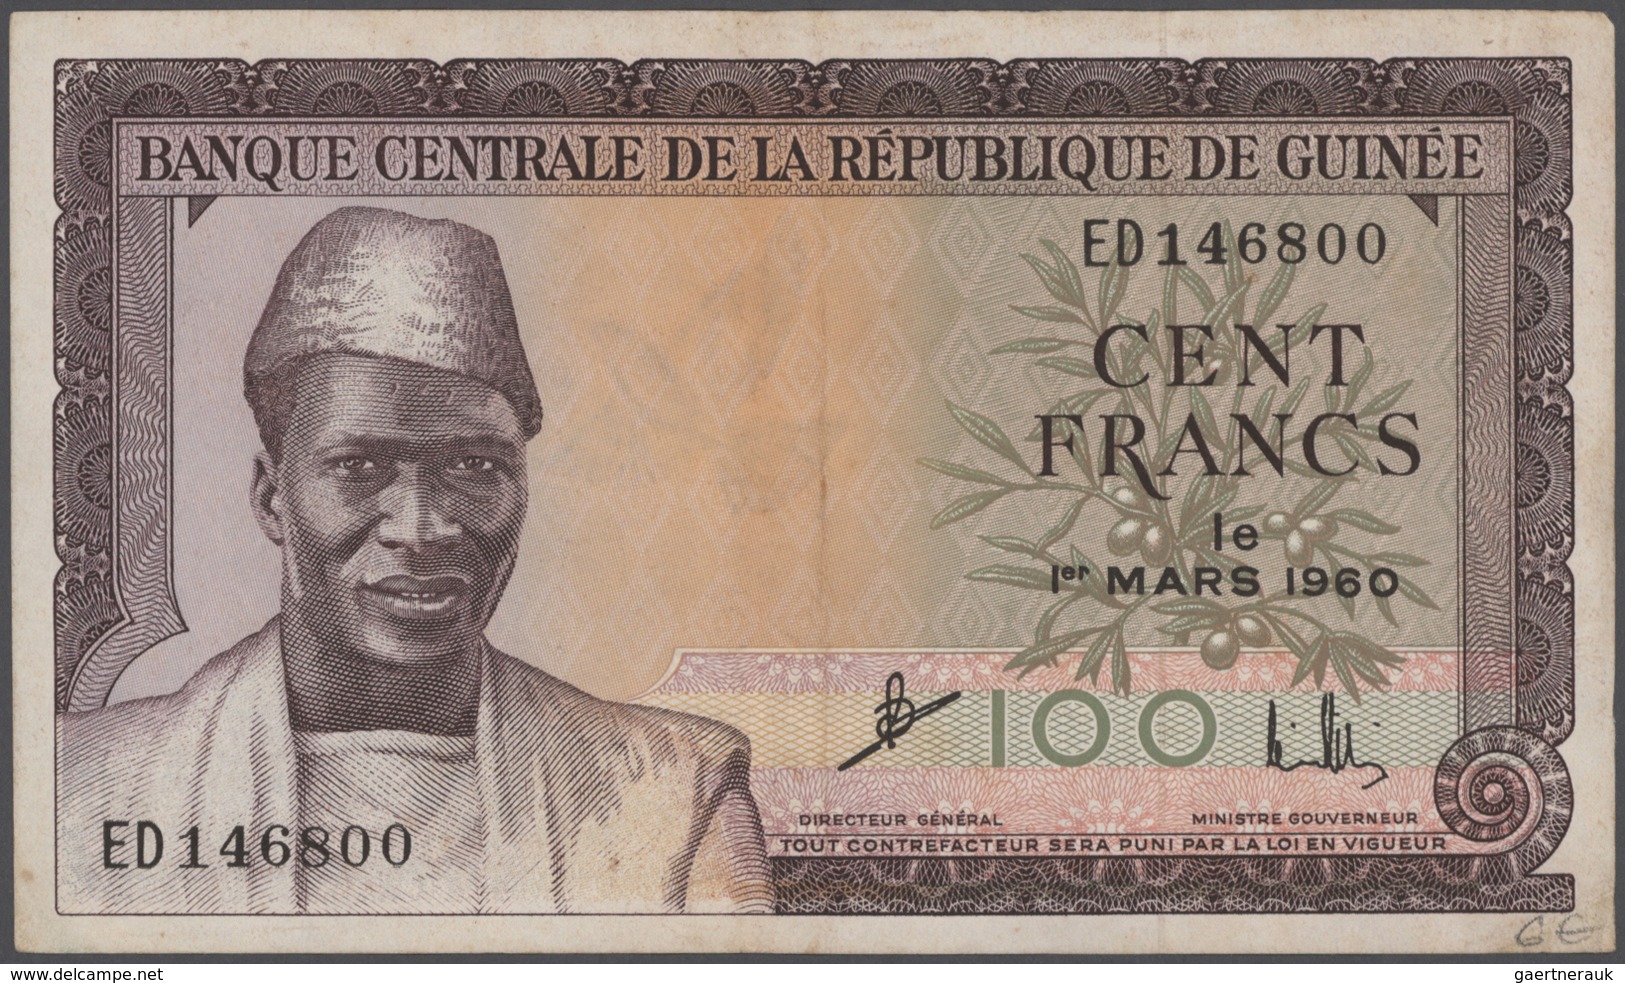 Alle Welt: Collectors album with more than 650 banknotes Guinea, Iceland, Indonesia, Iran, Italy, Ho